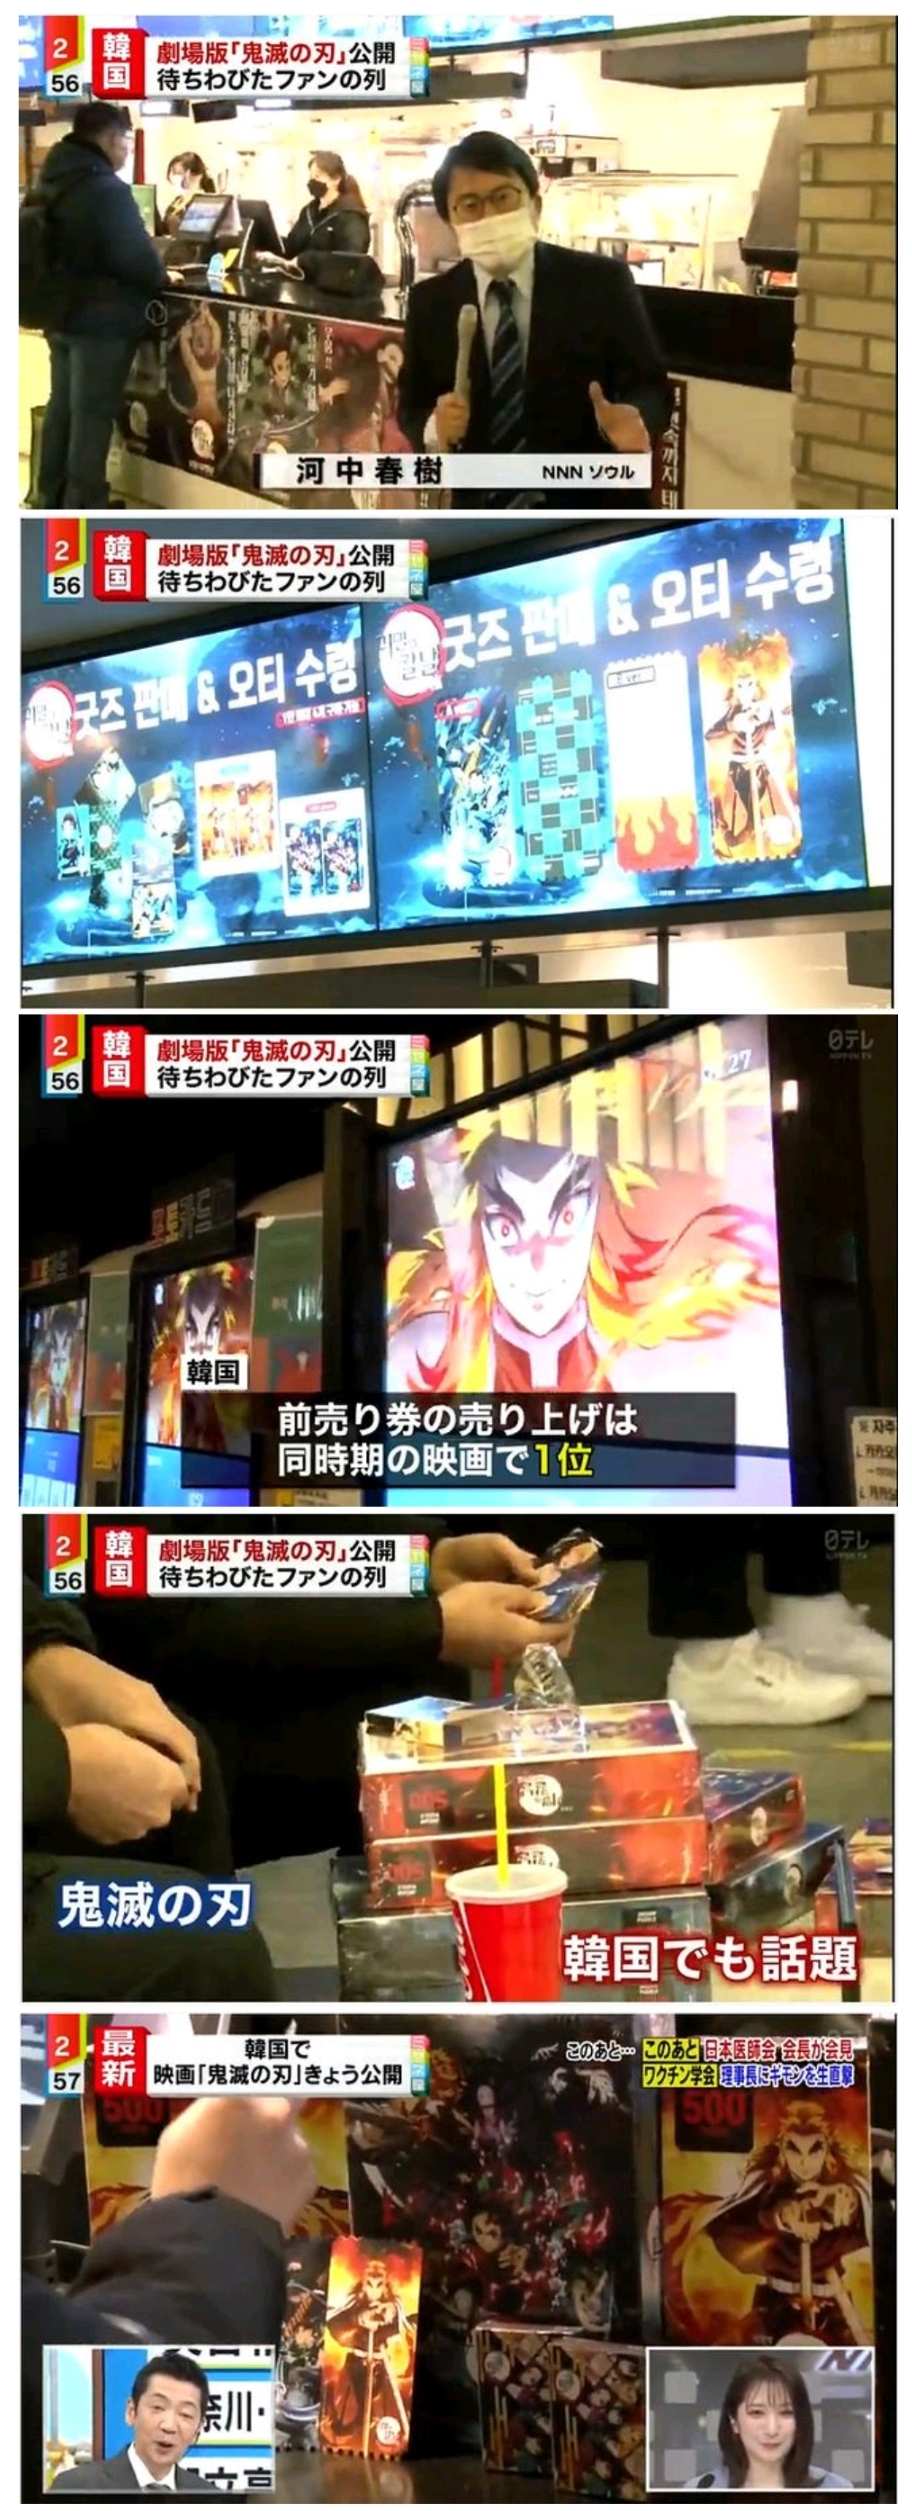 Because of the sword of the ghost, Japan is having a fun time broadcasting in Korea.jpg